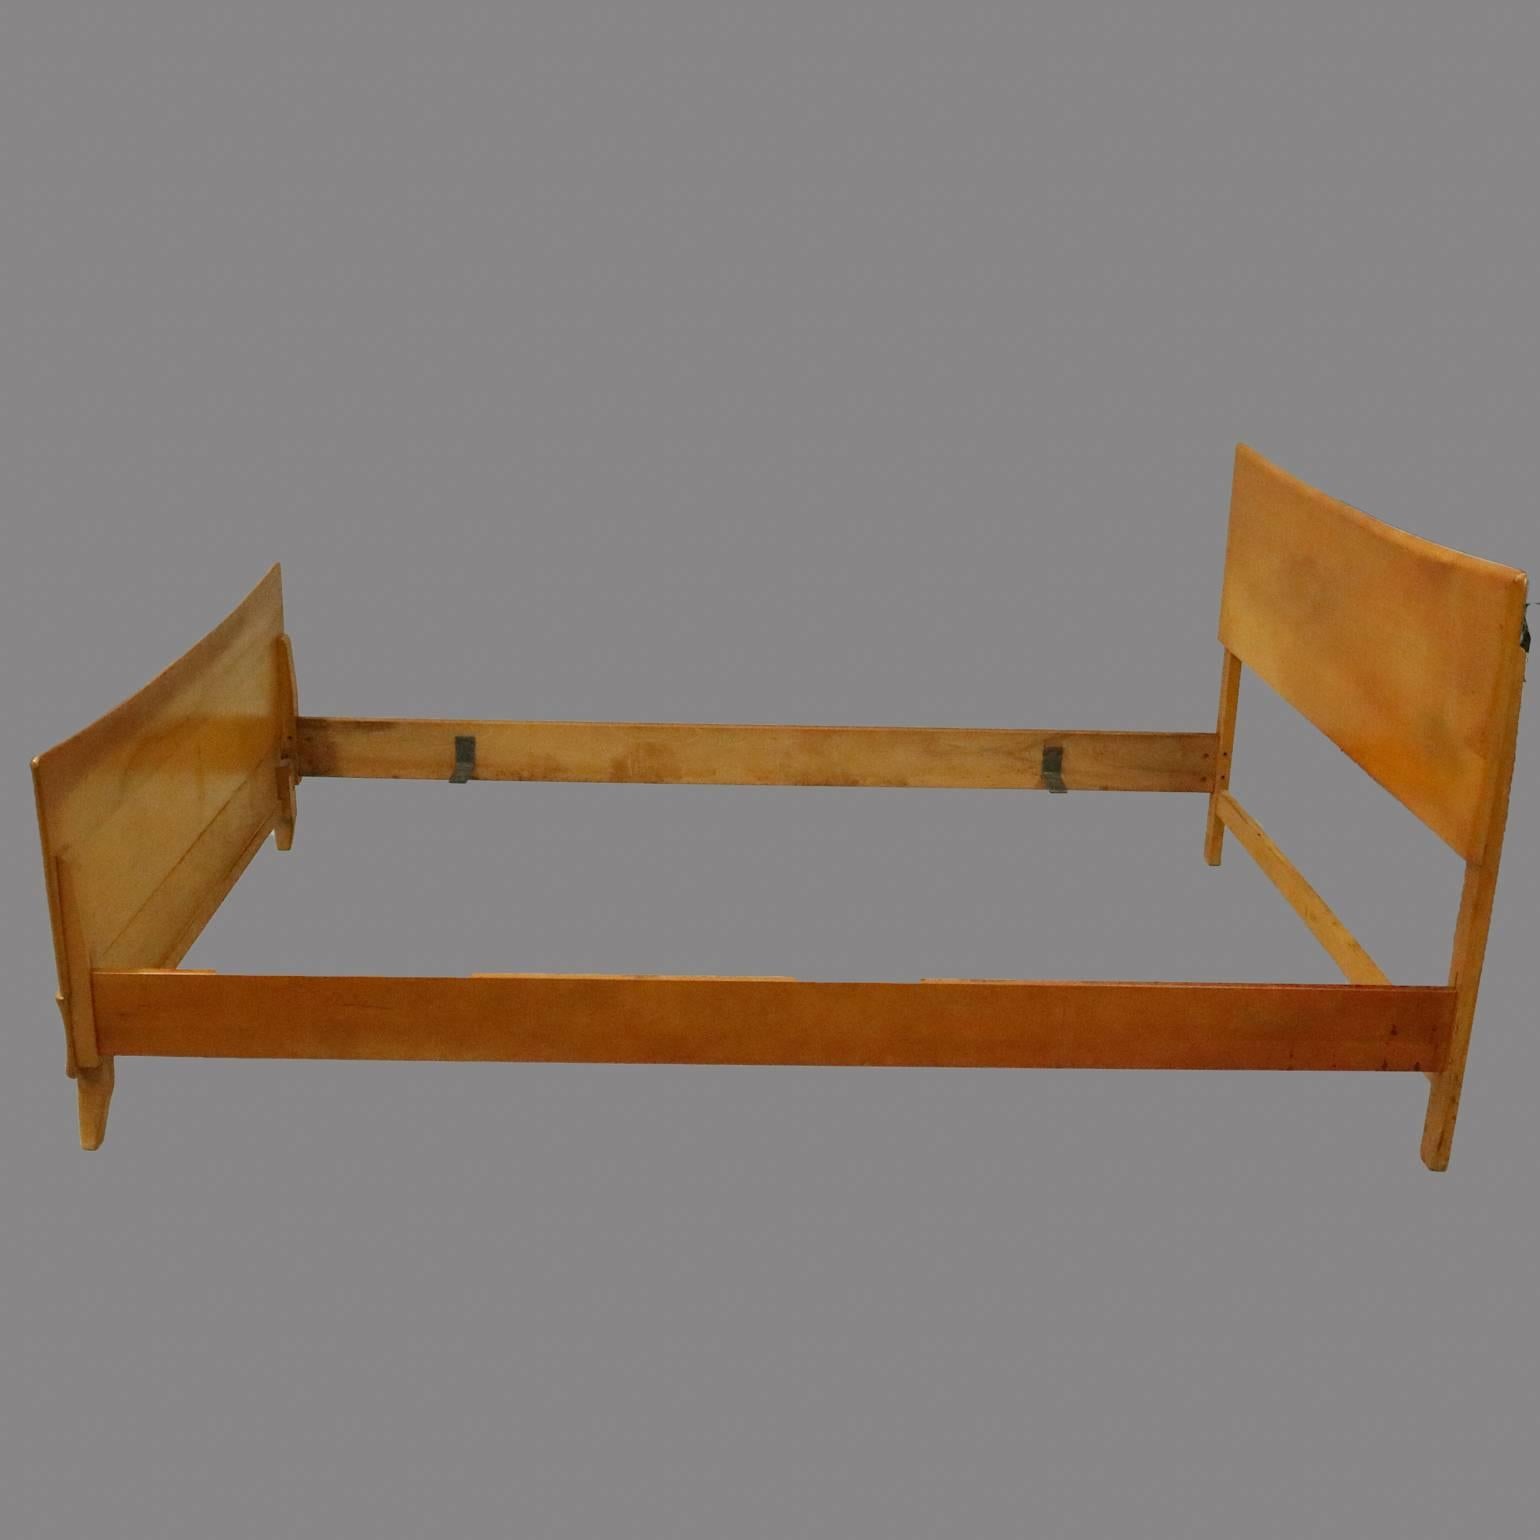 Vintage Heywood-Wakefield Kohinoor double bed frame features Northern Yellow Birch wood construction designed by Ernest Herman, circa 1950

Measures: 35" H (headboard) x 59" W x 79" D, 24" H (footboard)

FYI.......
The M 140